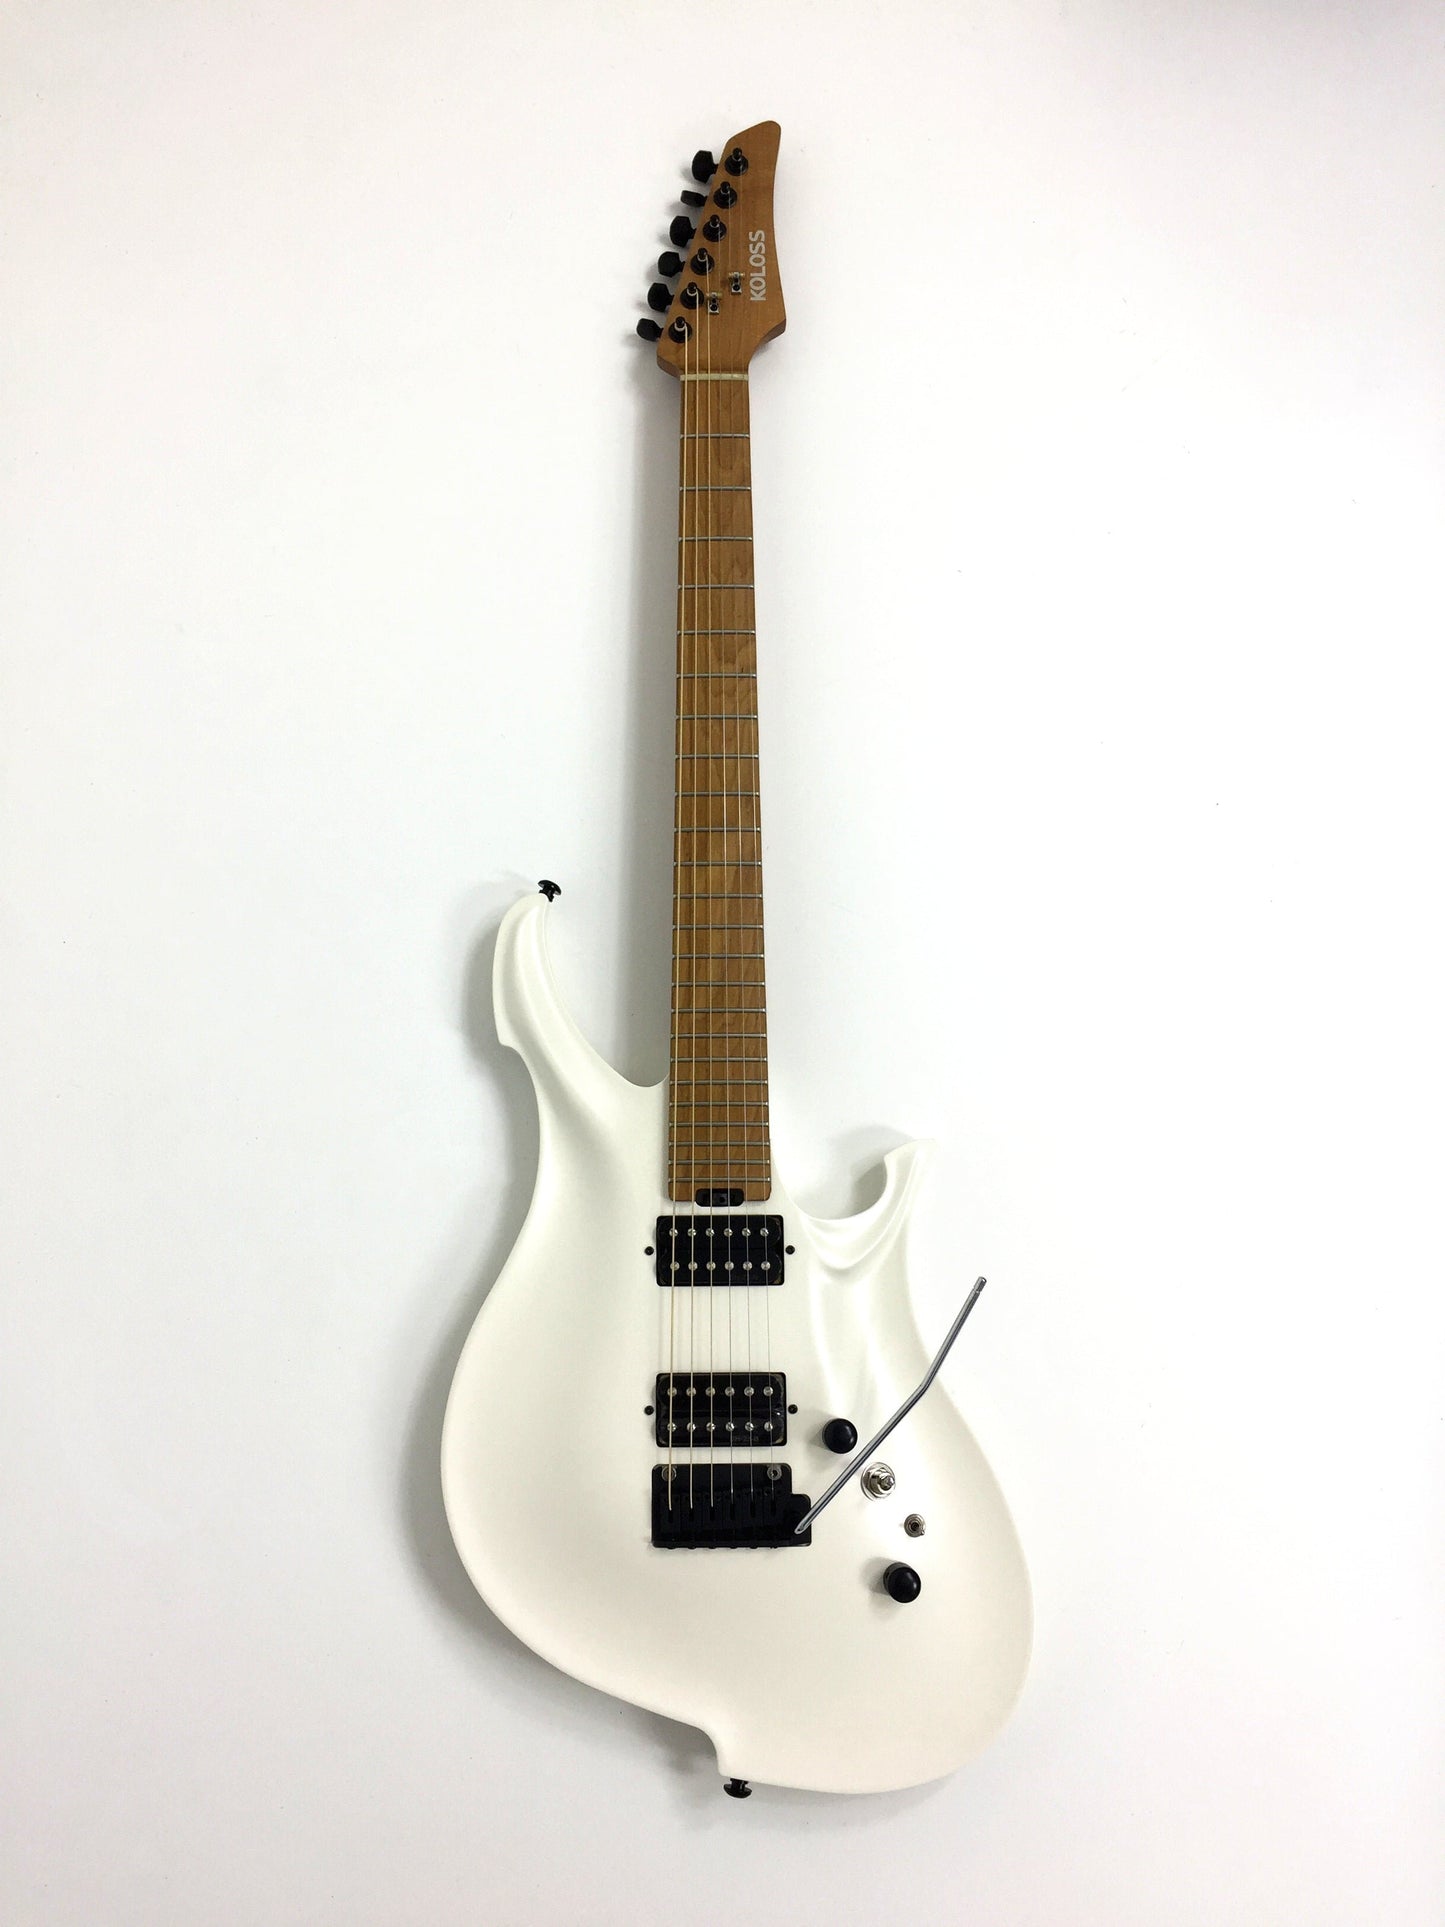 KOLOSS GT4MPWH White Aluminum Body Roasted Maple Neck Electric Guitar + Bag